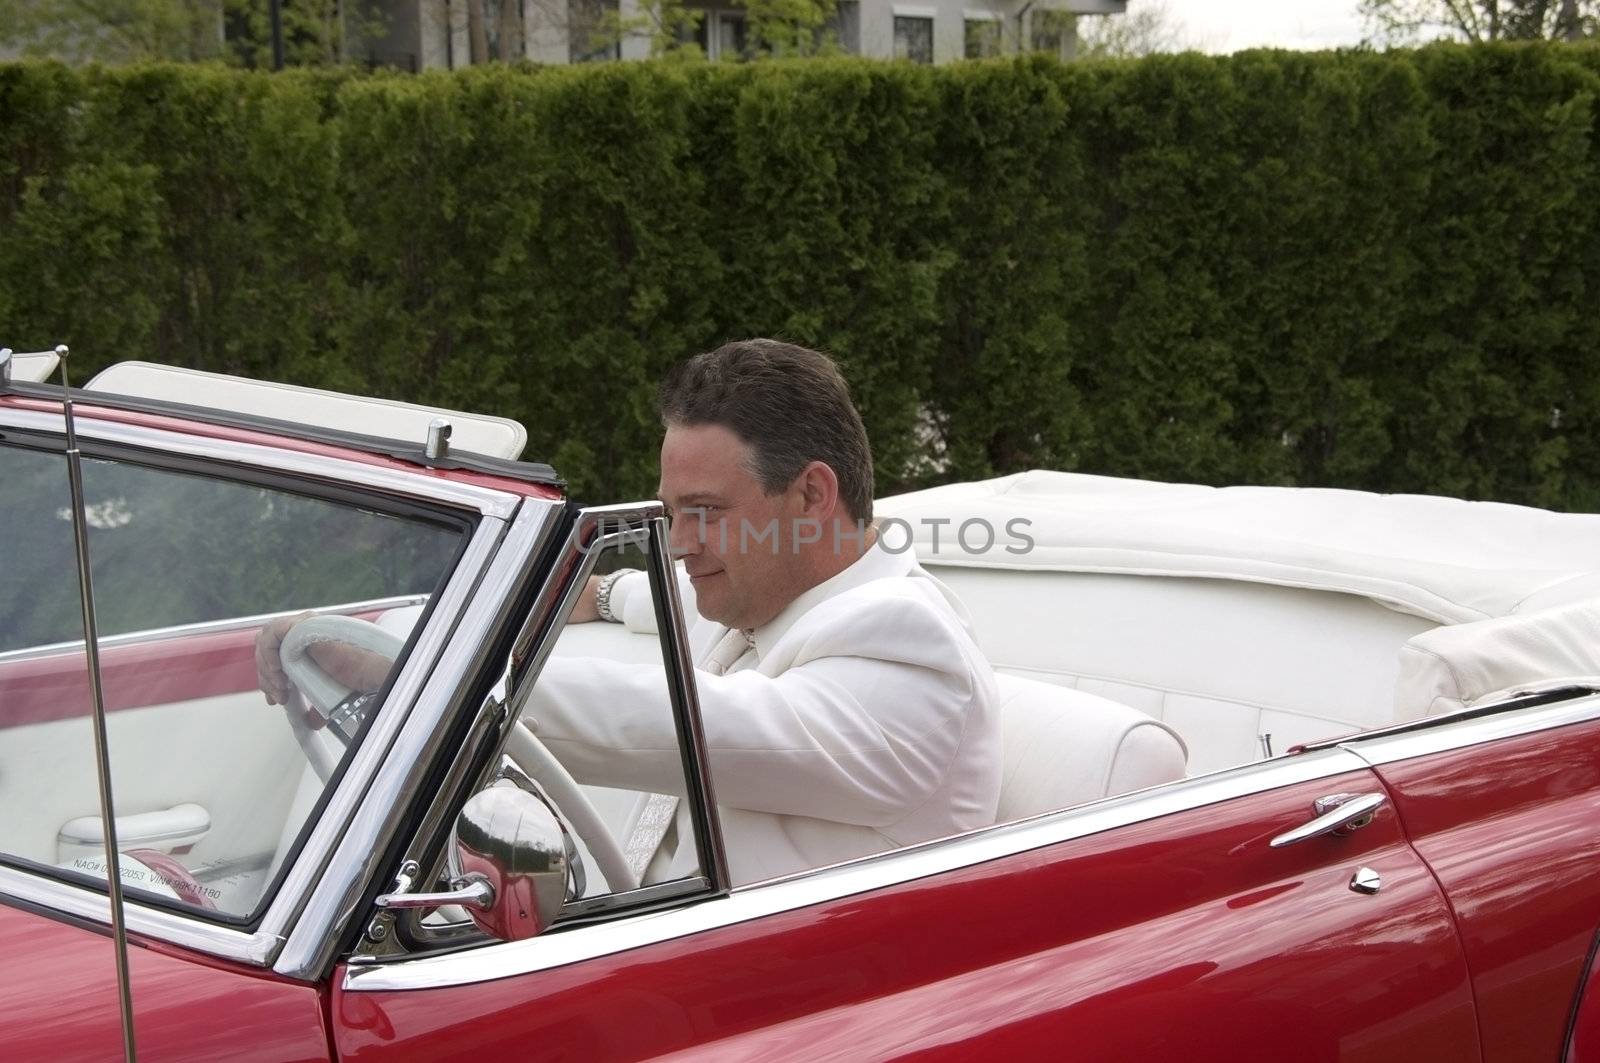 A sharp dressed man driving an old classic convertible car.